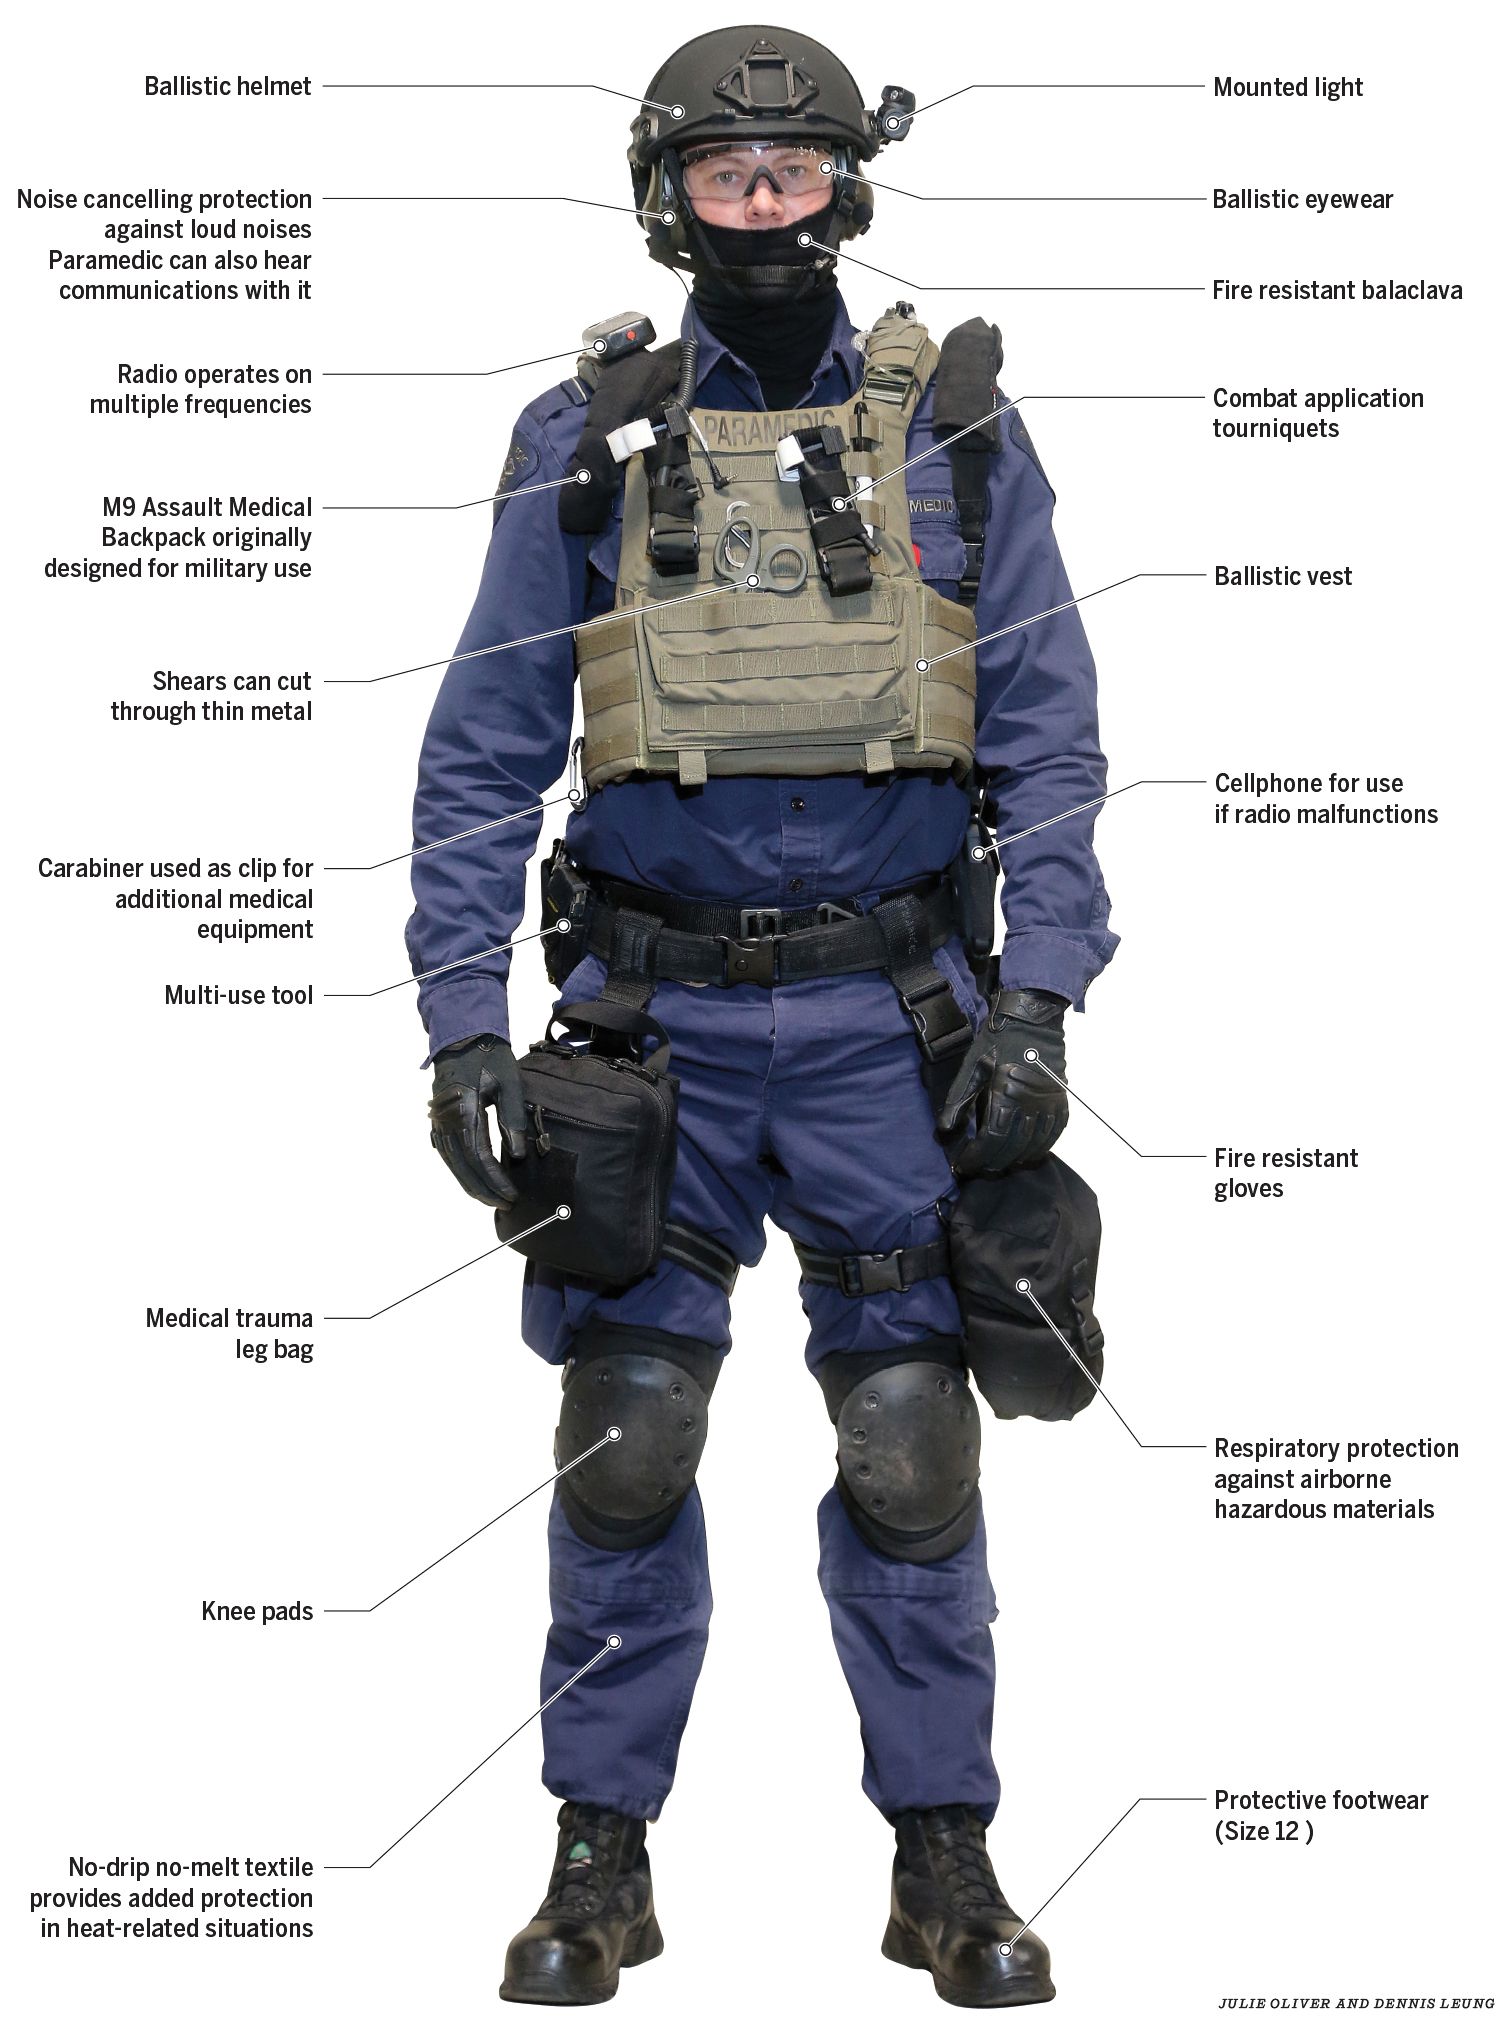 Ottawa's tactical paramedics are using war-zone devloped gear